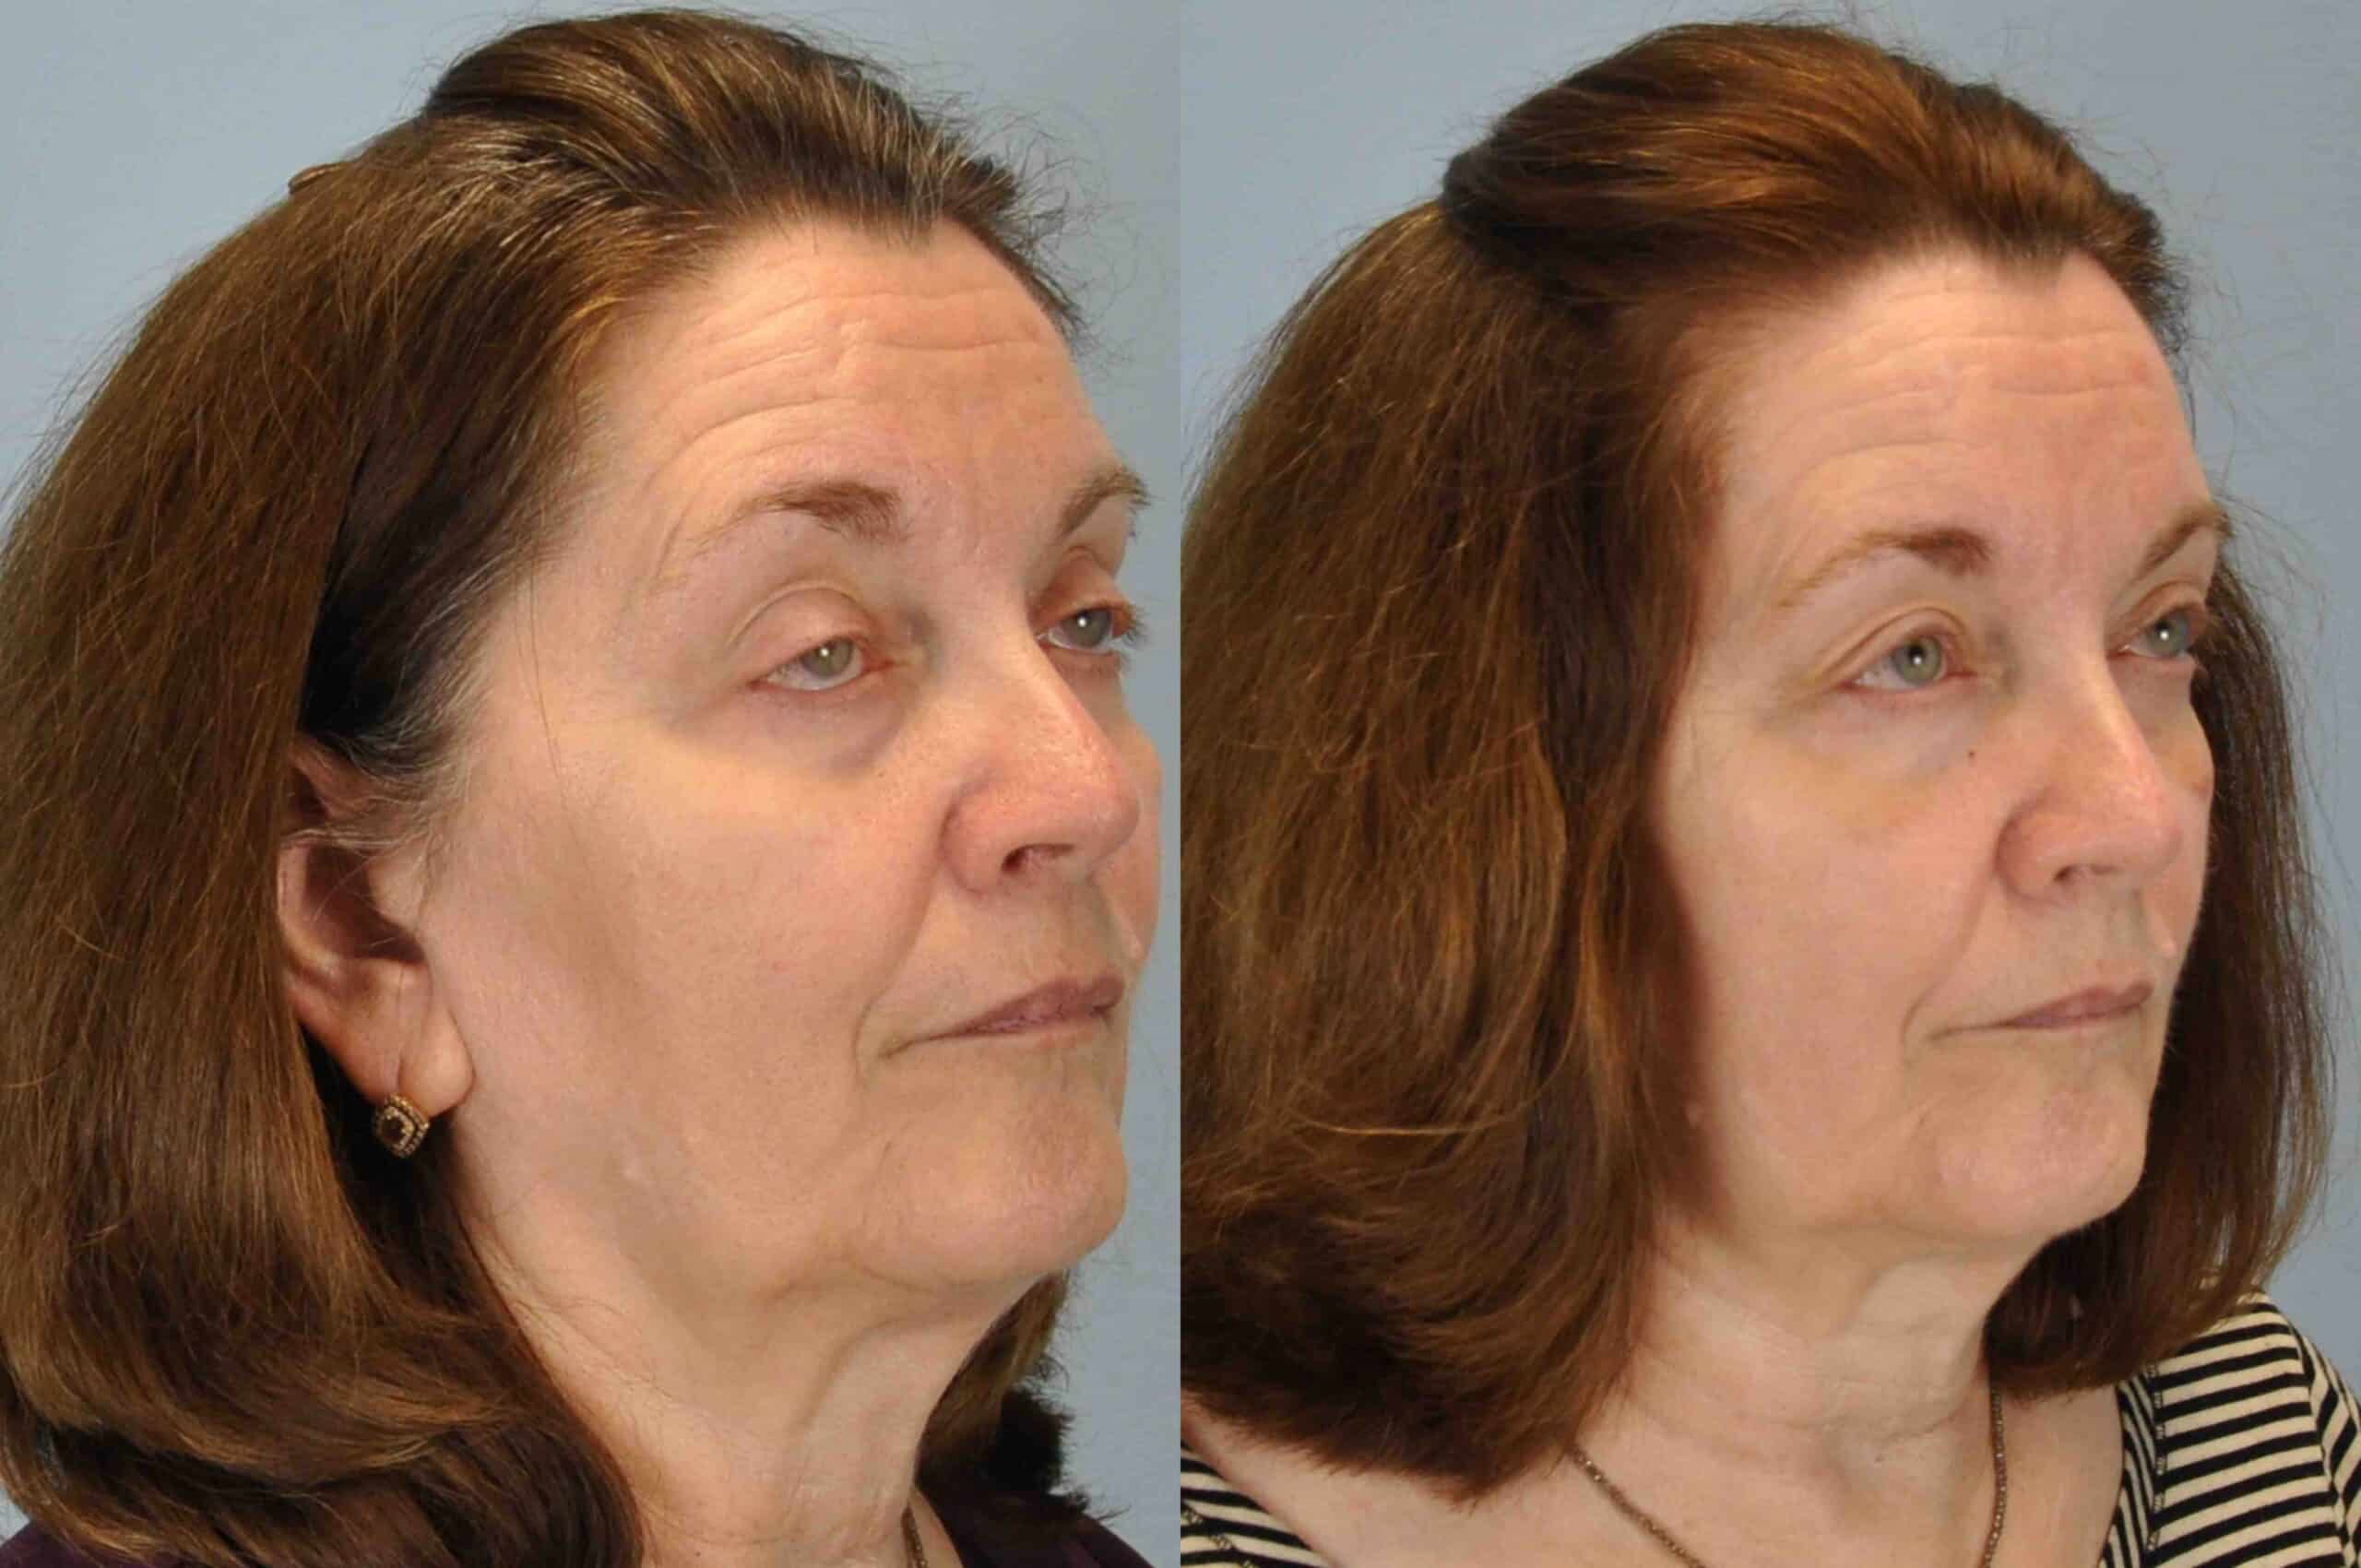 Before and after 3 weeks post op from Lower blepharoplasty, Levator Ptosis performed by Dr. Paul Vanek (diagonal view)